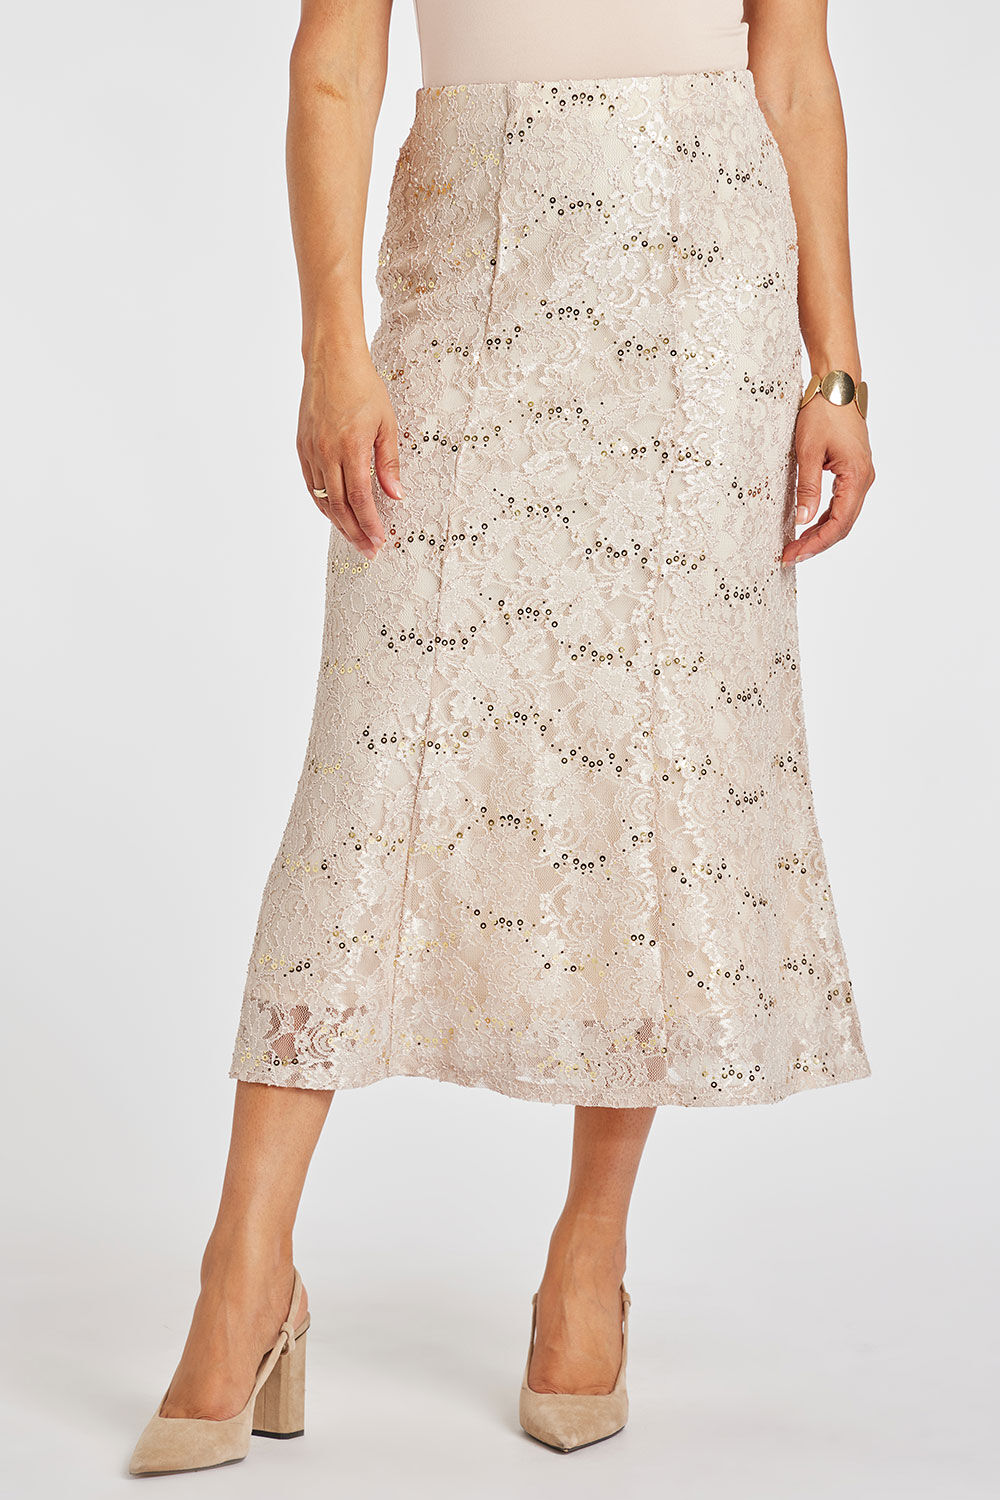 Bonmarche Oyster Sequin Lace Elasticated Flippy Skirt, Size: 10